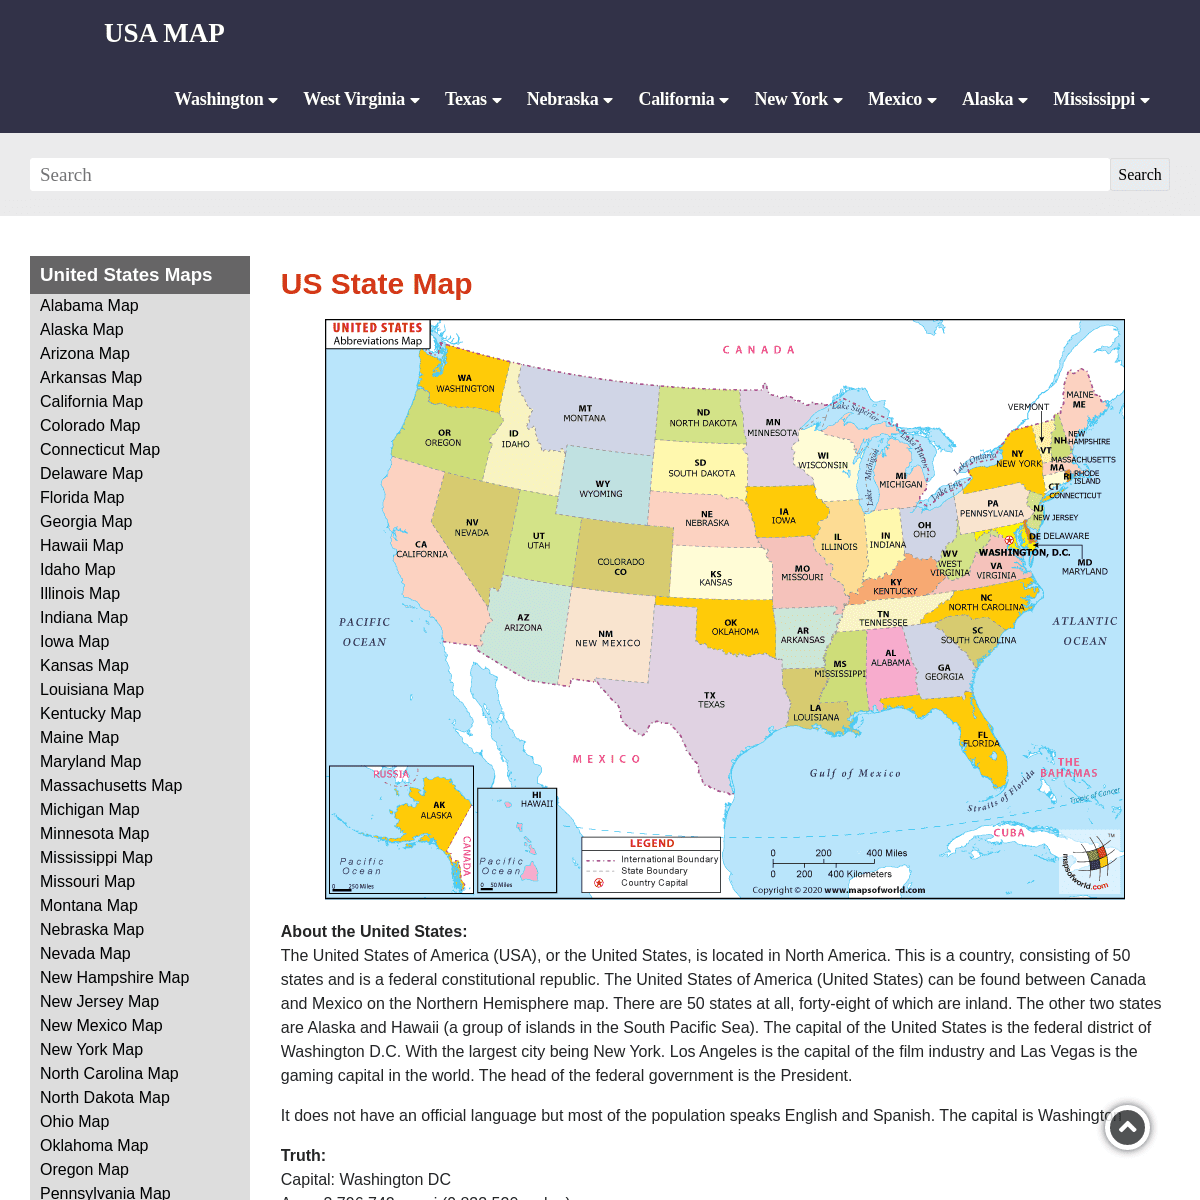 A complete backup of https://usa-map.co